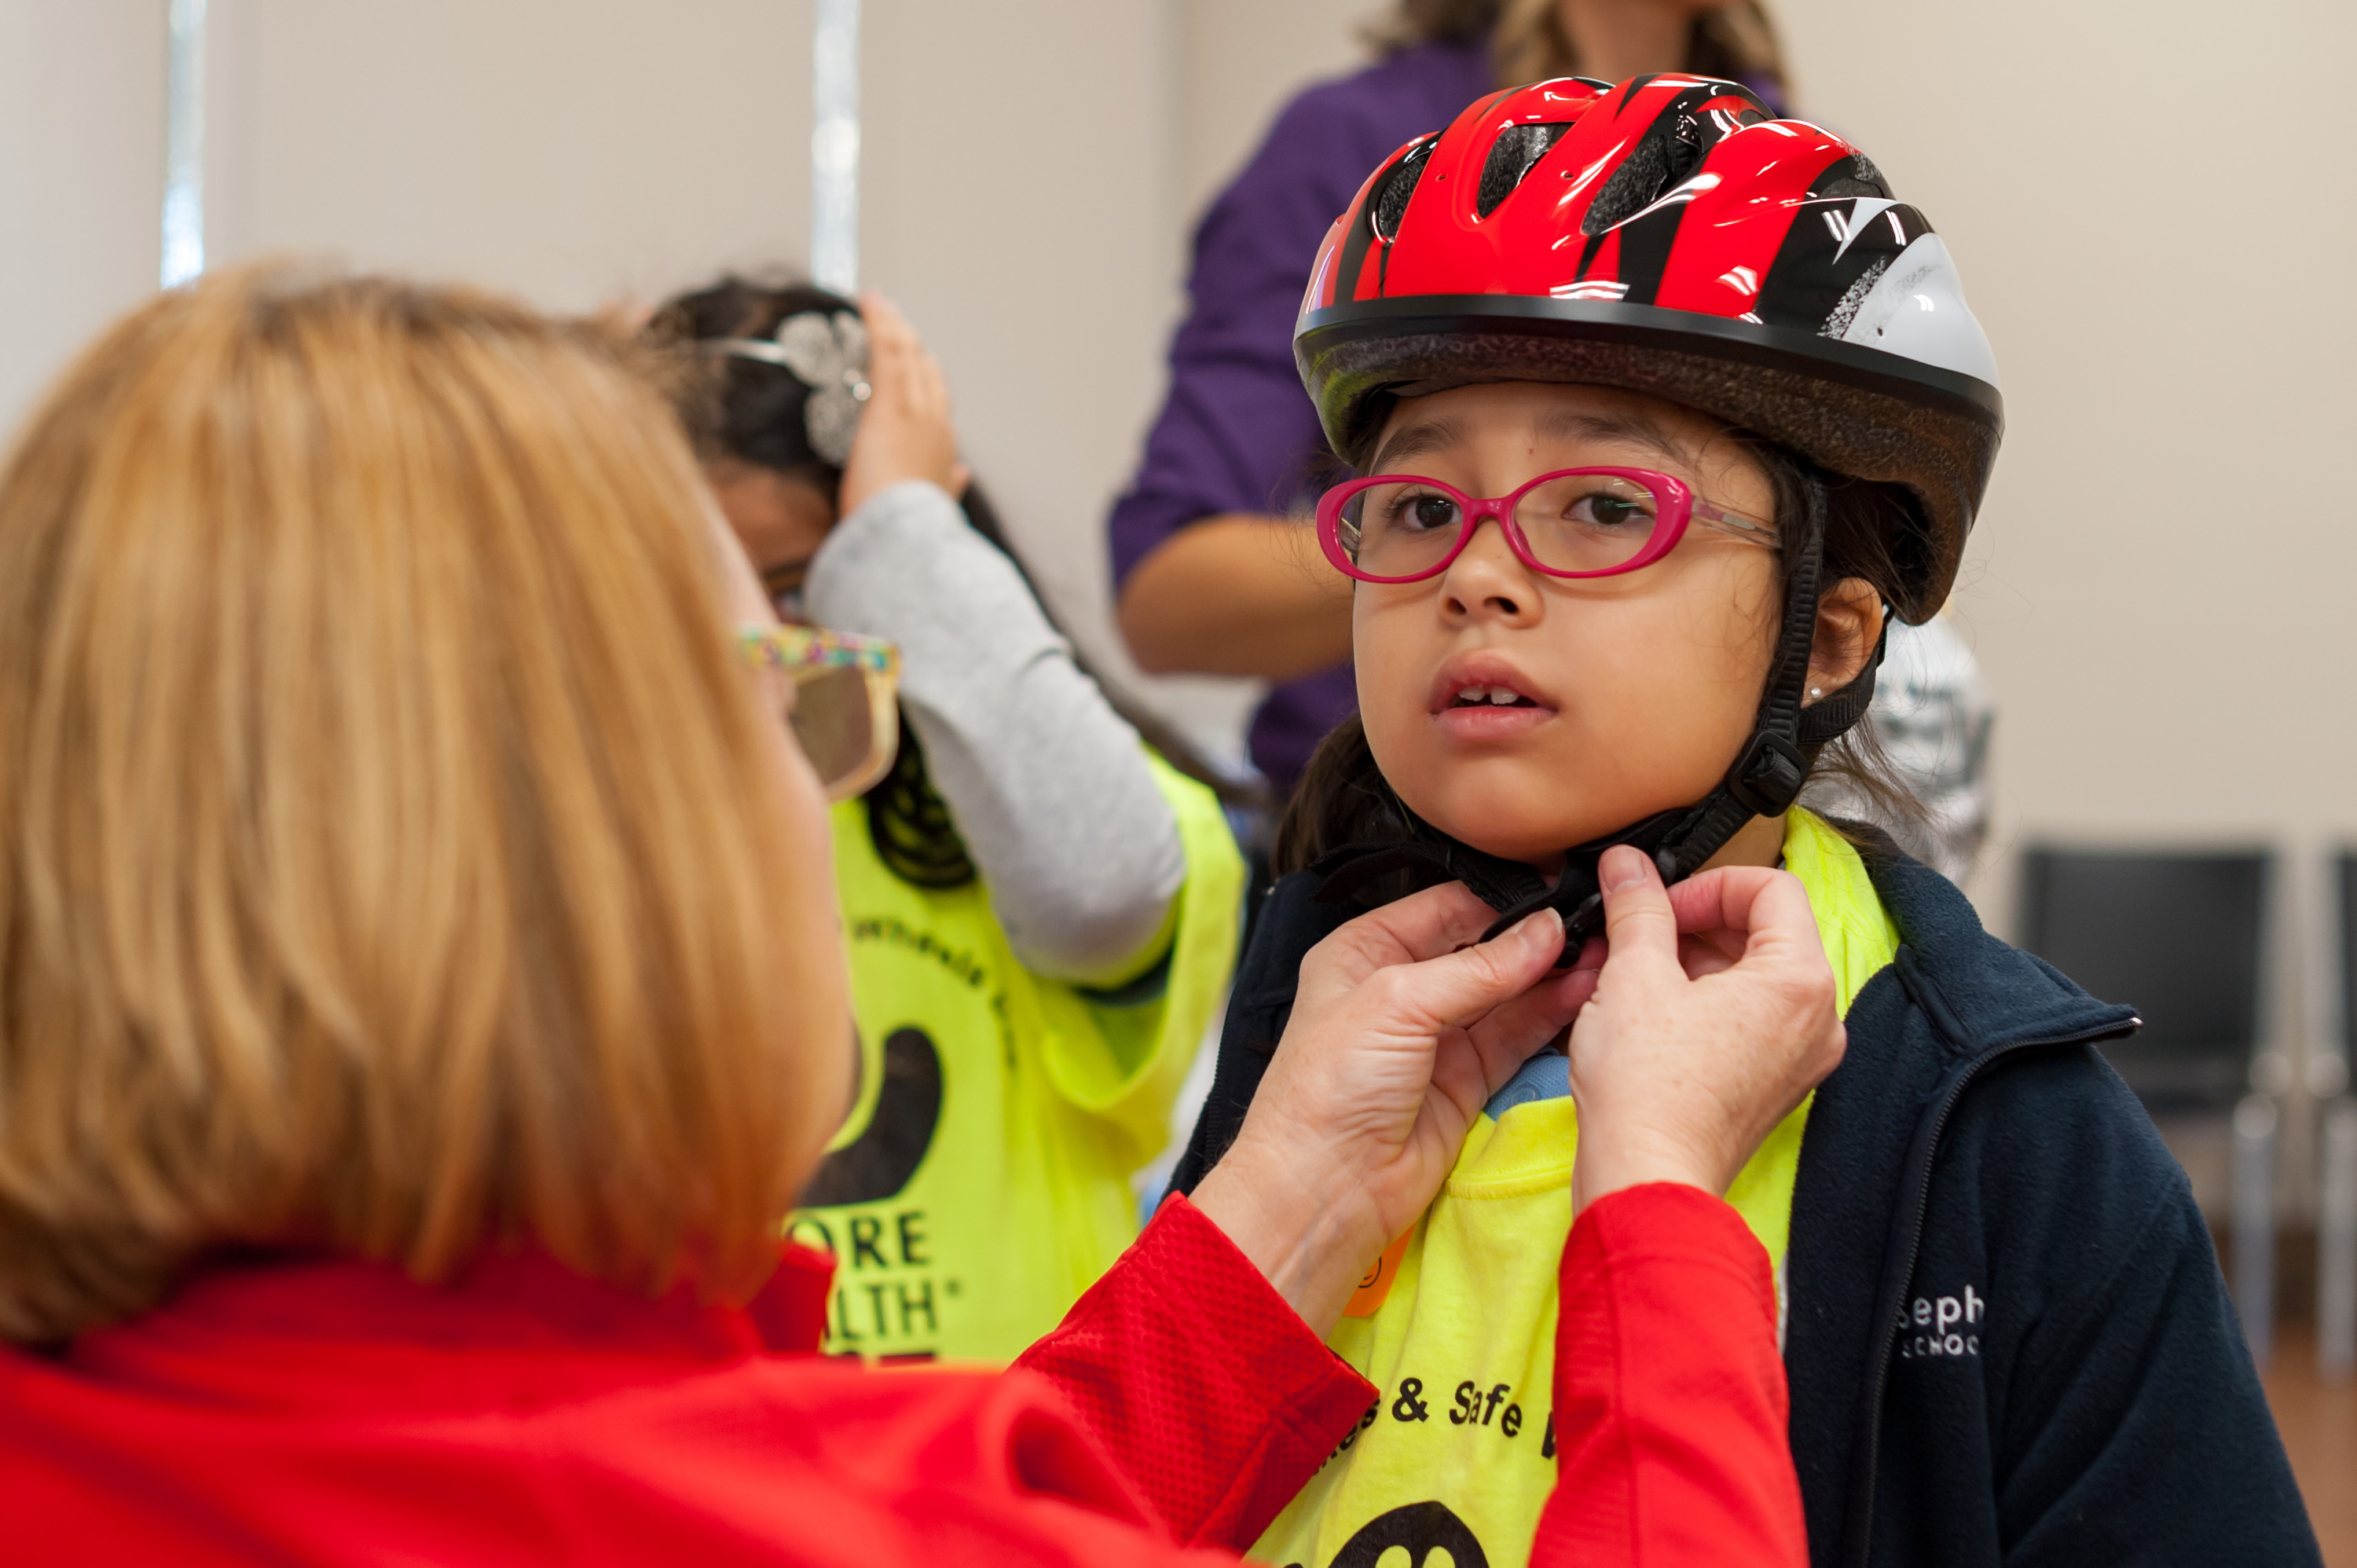 Girl trying on a helmet with More Health